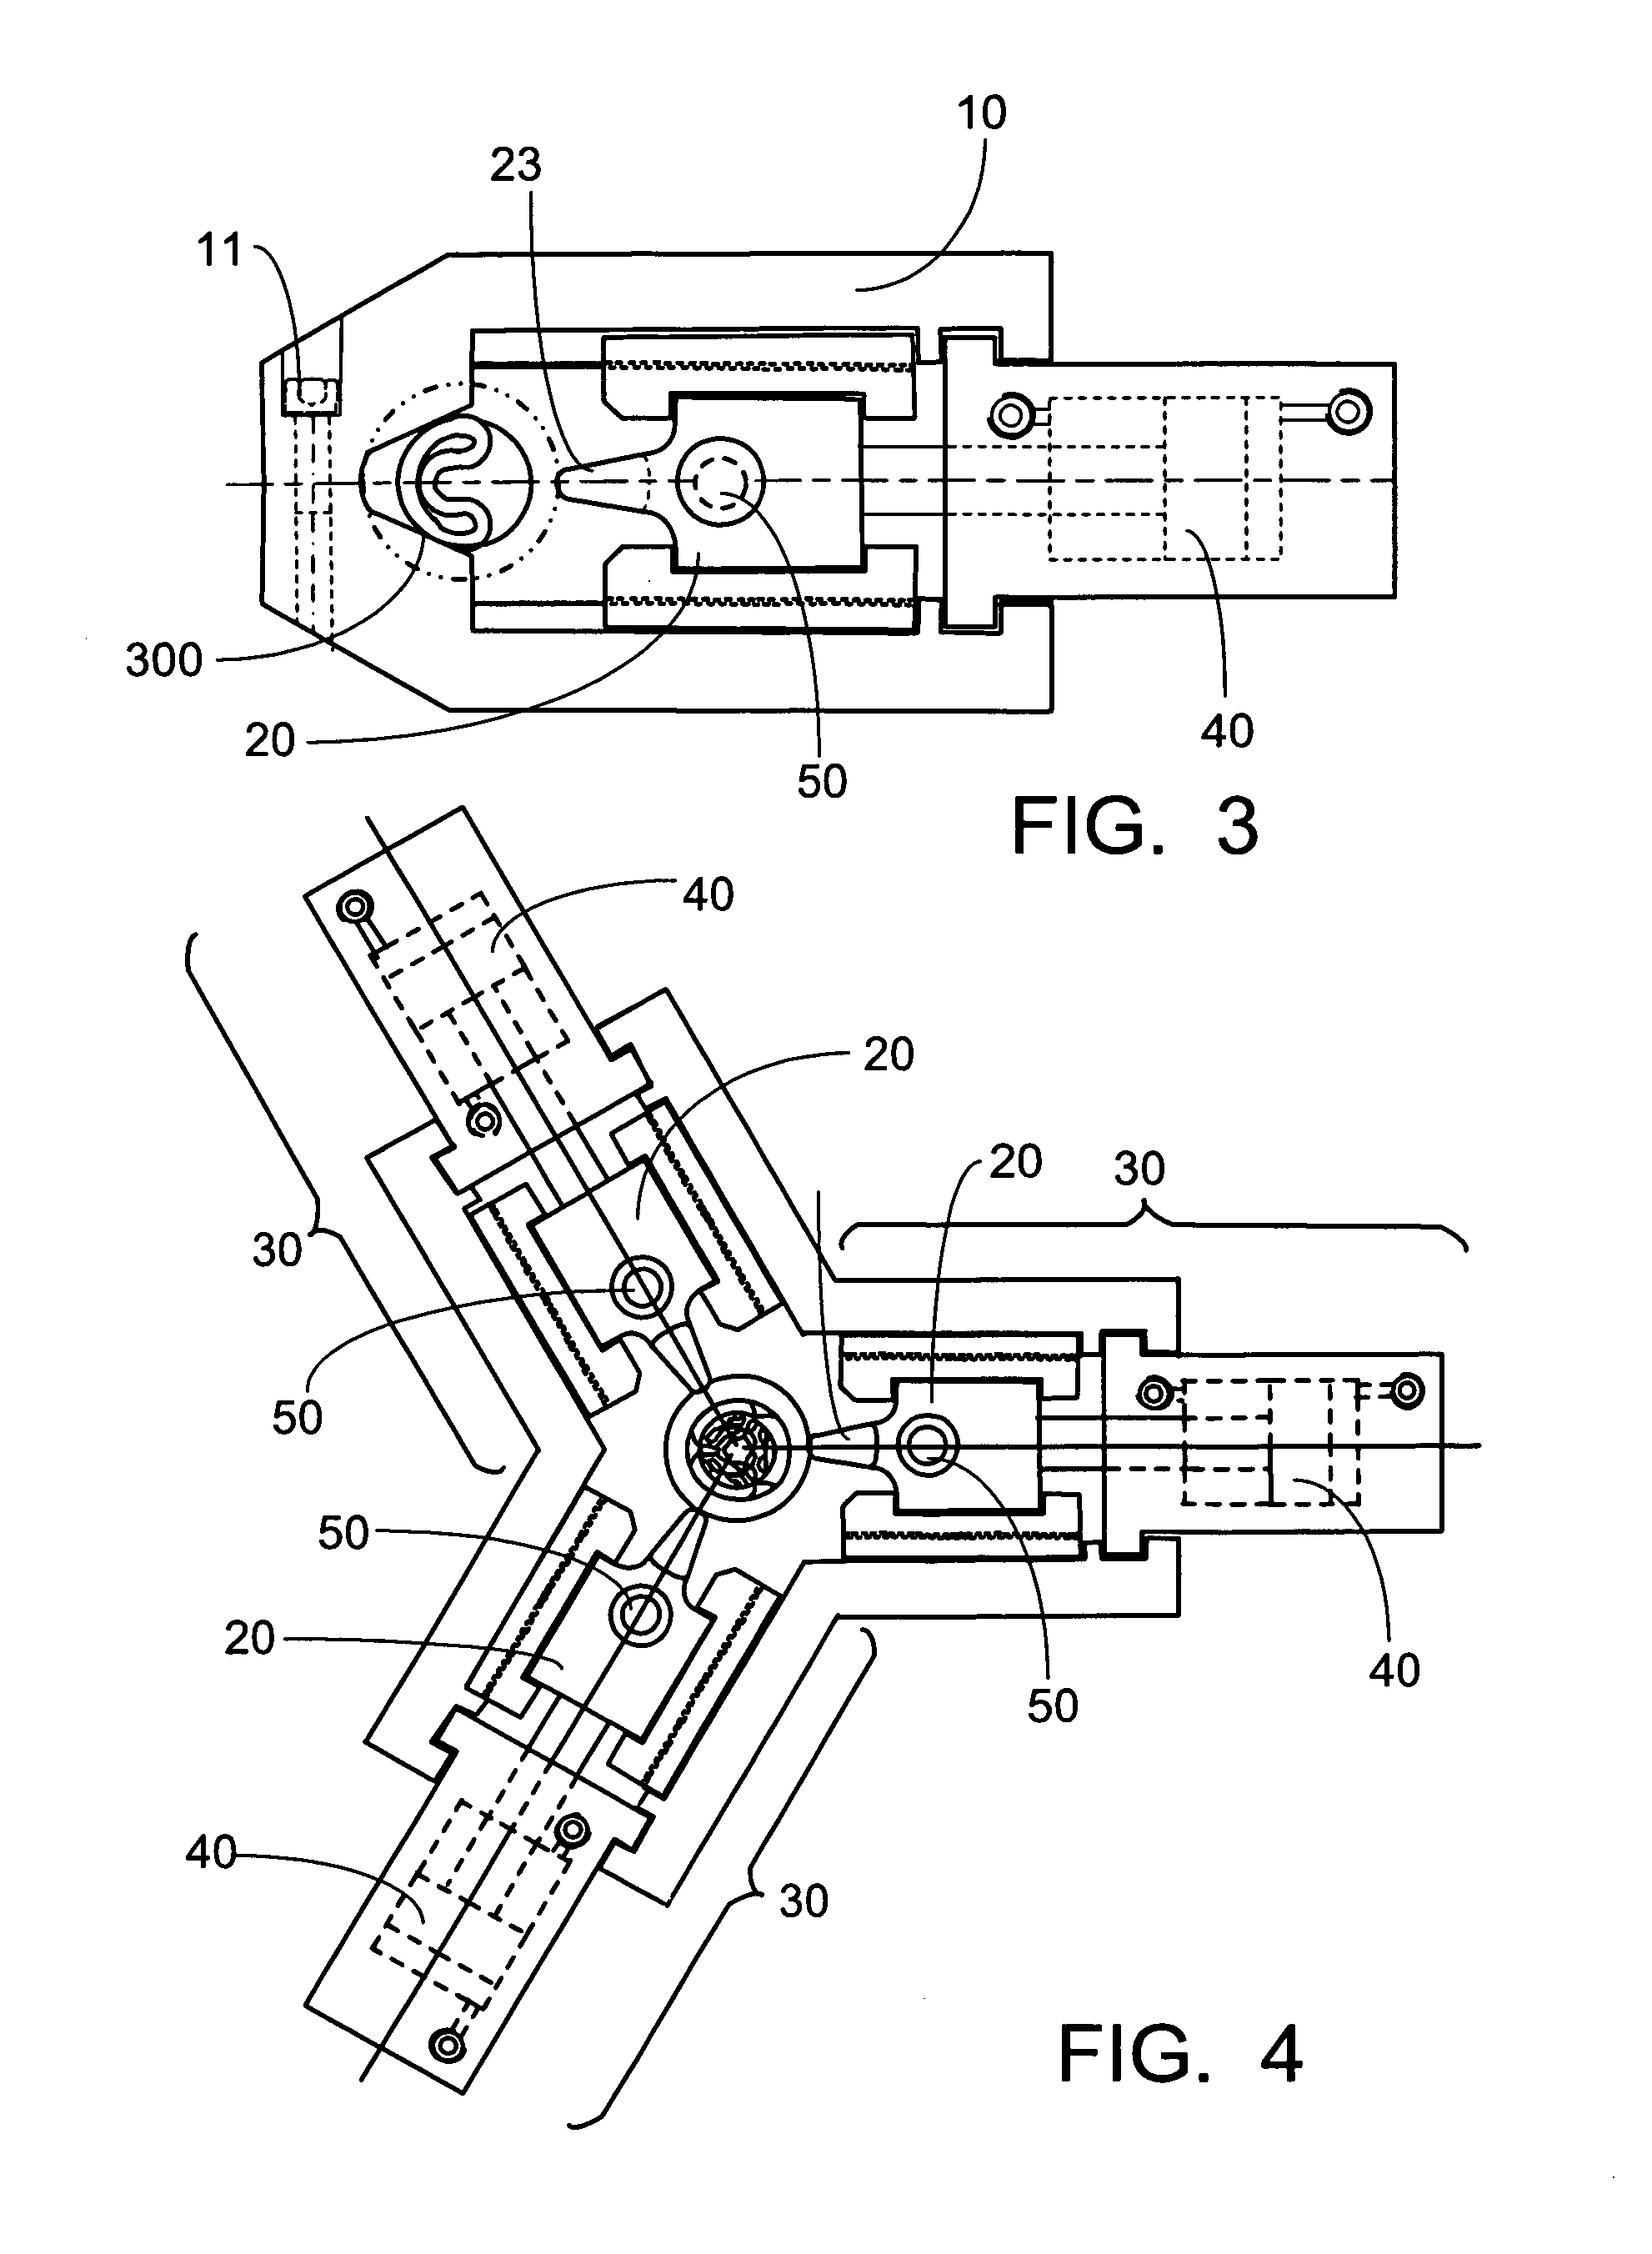 External tube deforming extraction device